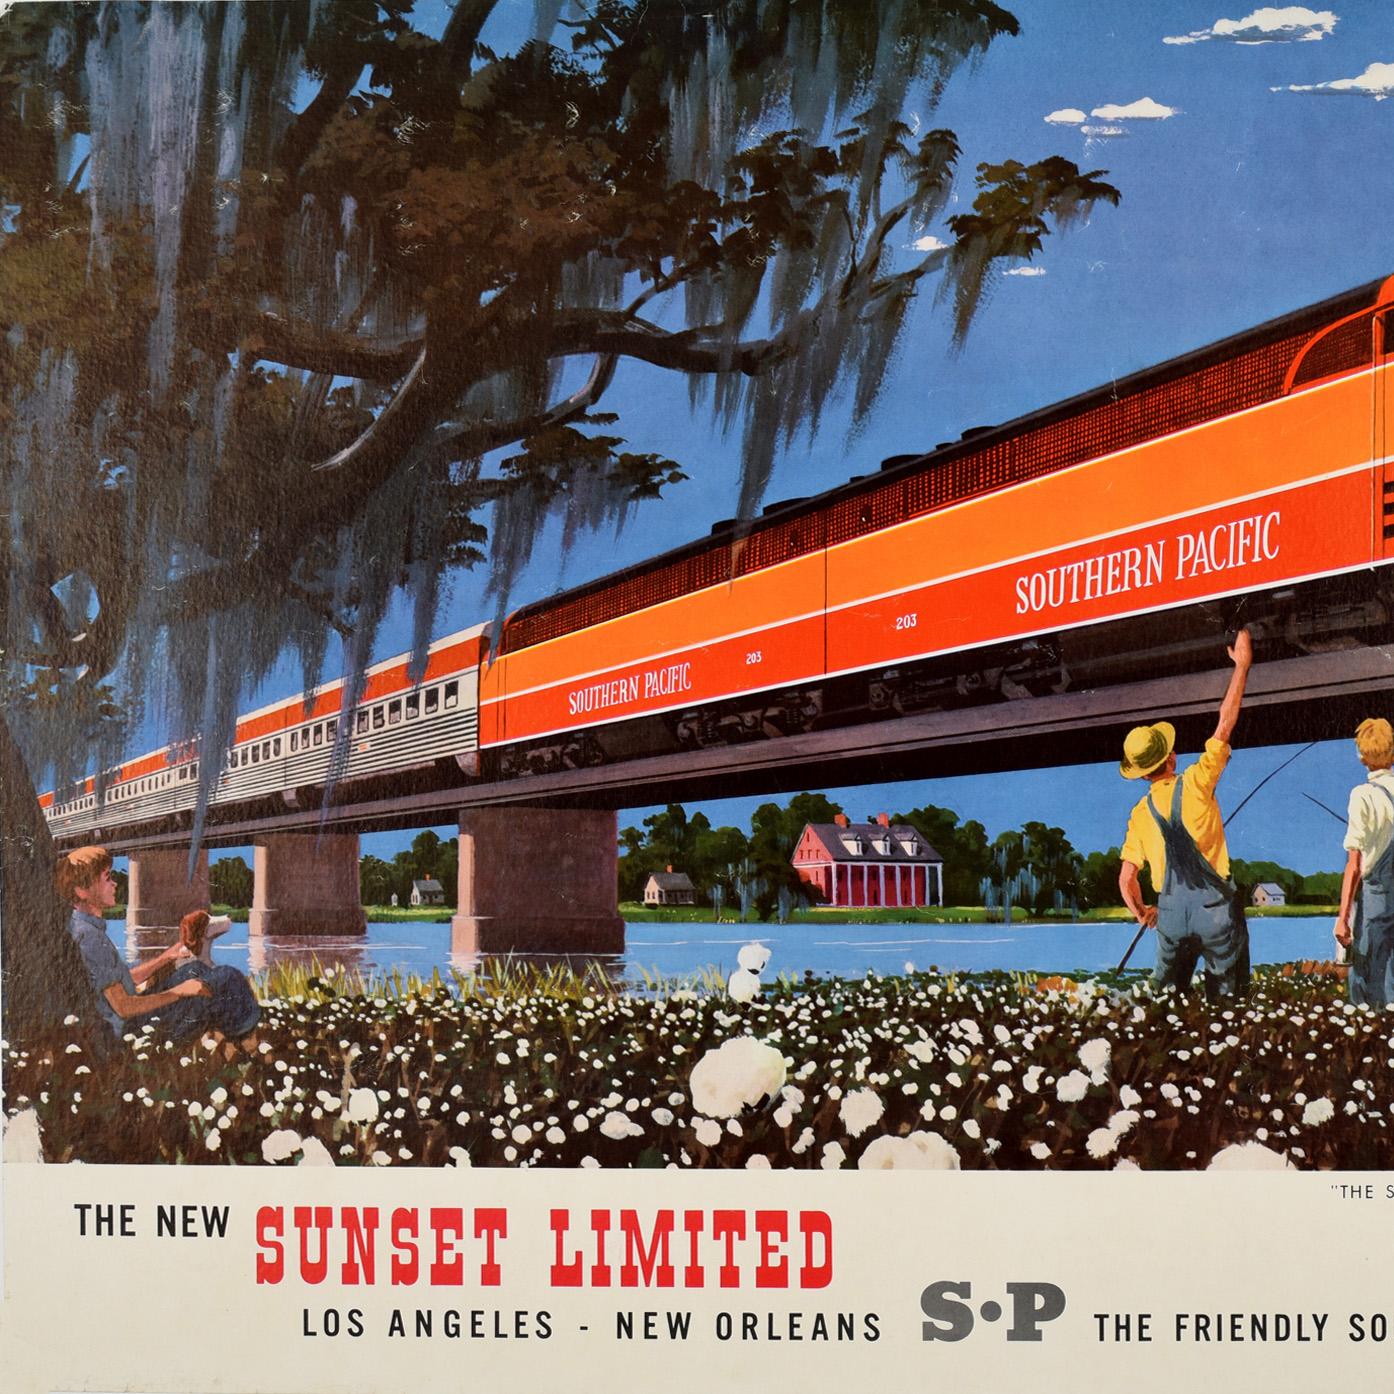 American Original Vintage Travel Poster Sunset Limited Railroad Southern Pacific Railway For Sale